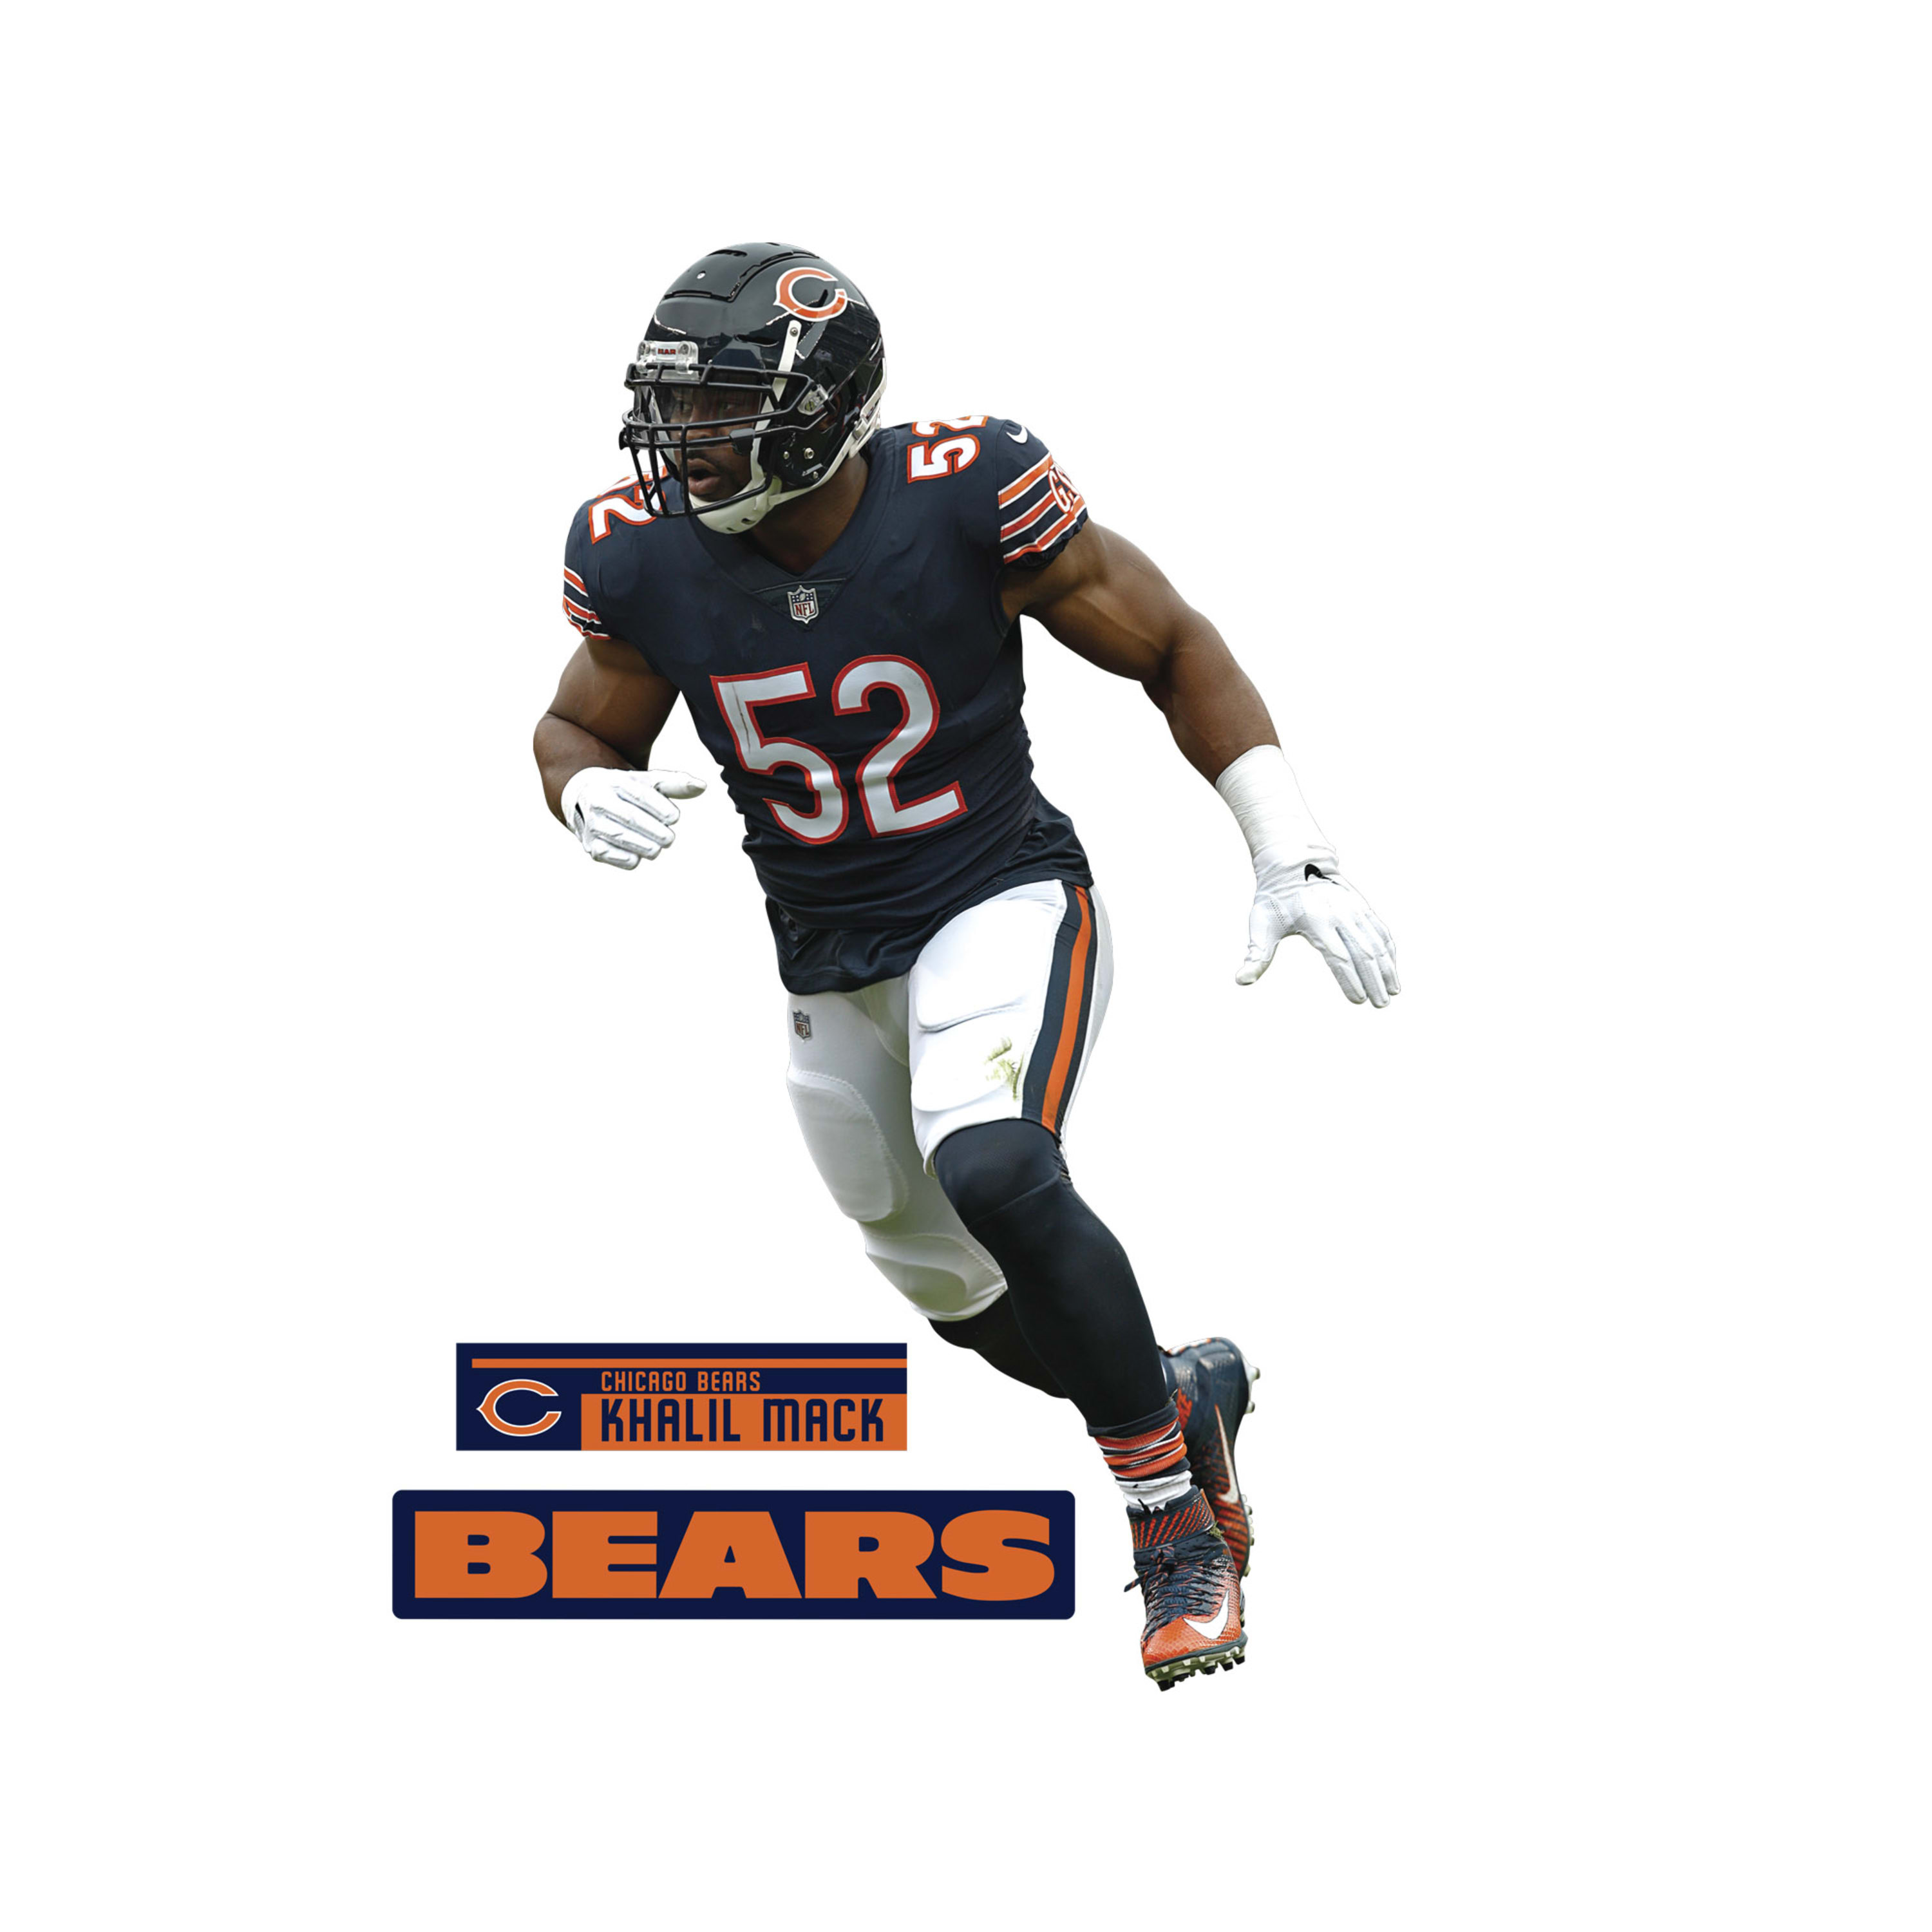 Khalil Mack Life Size Officially Licensed Nfl Removable Wall